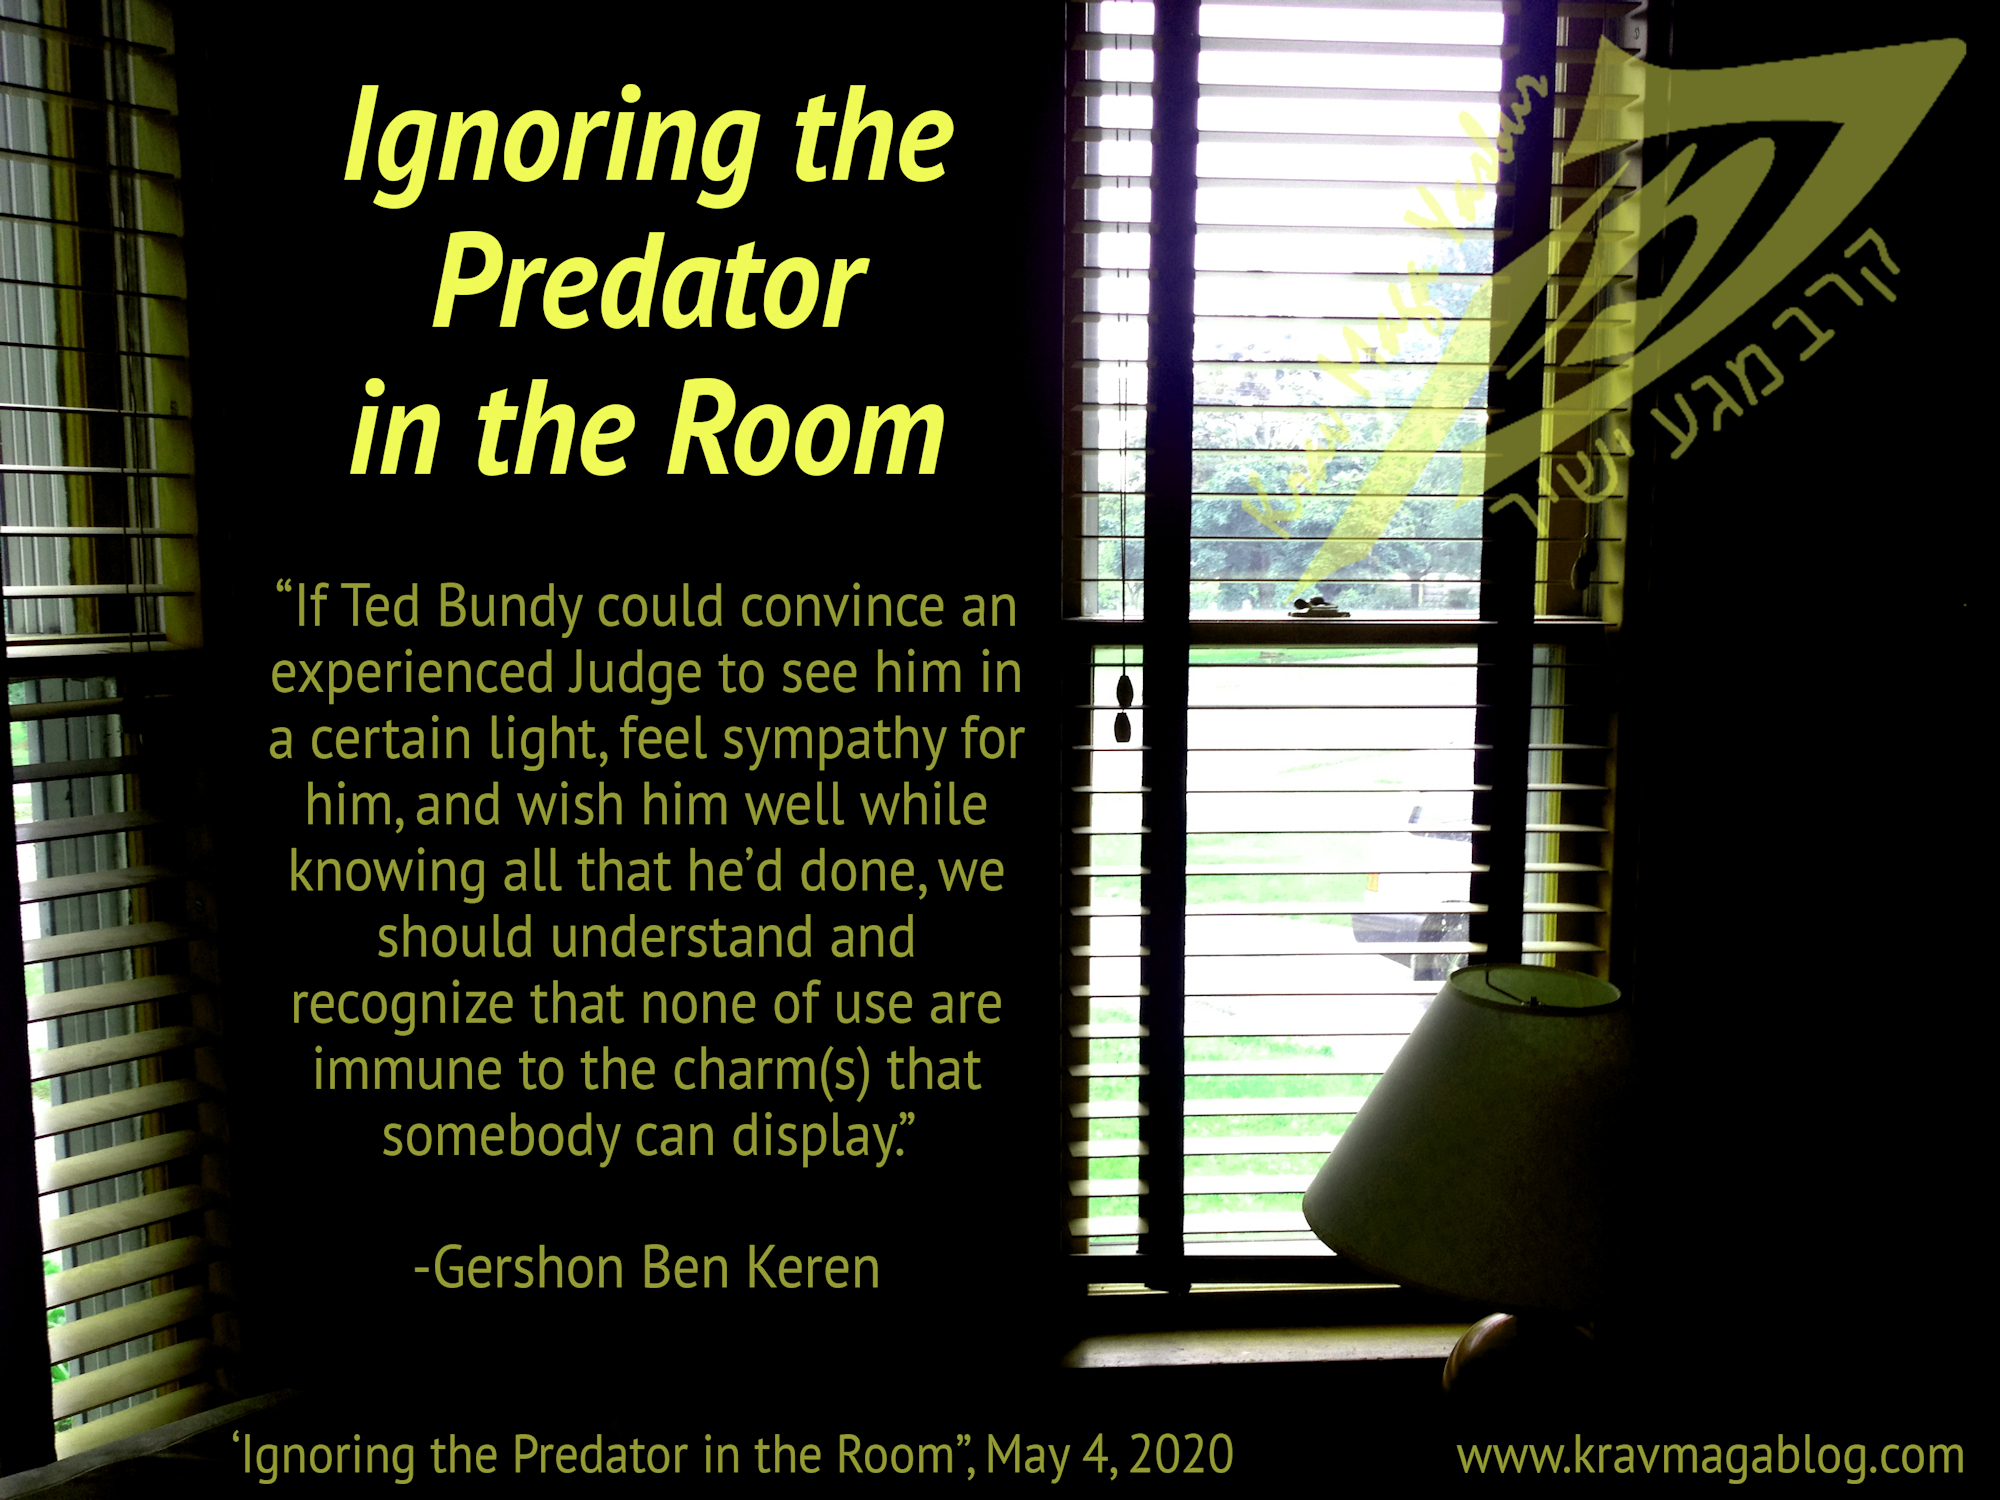 Blog About Ignoring the Predator in the Room